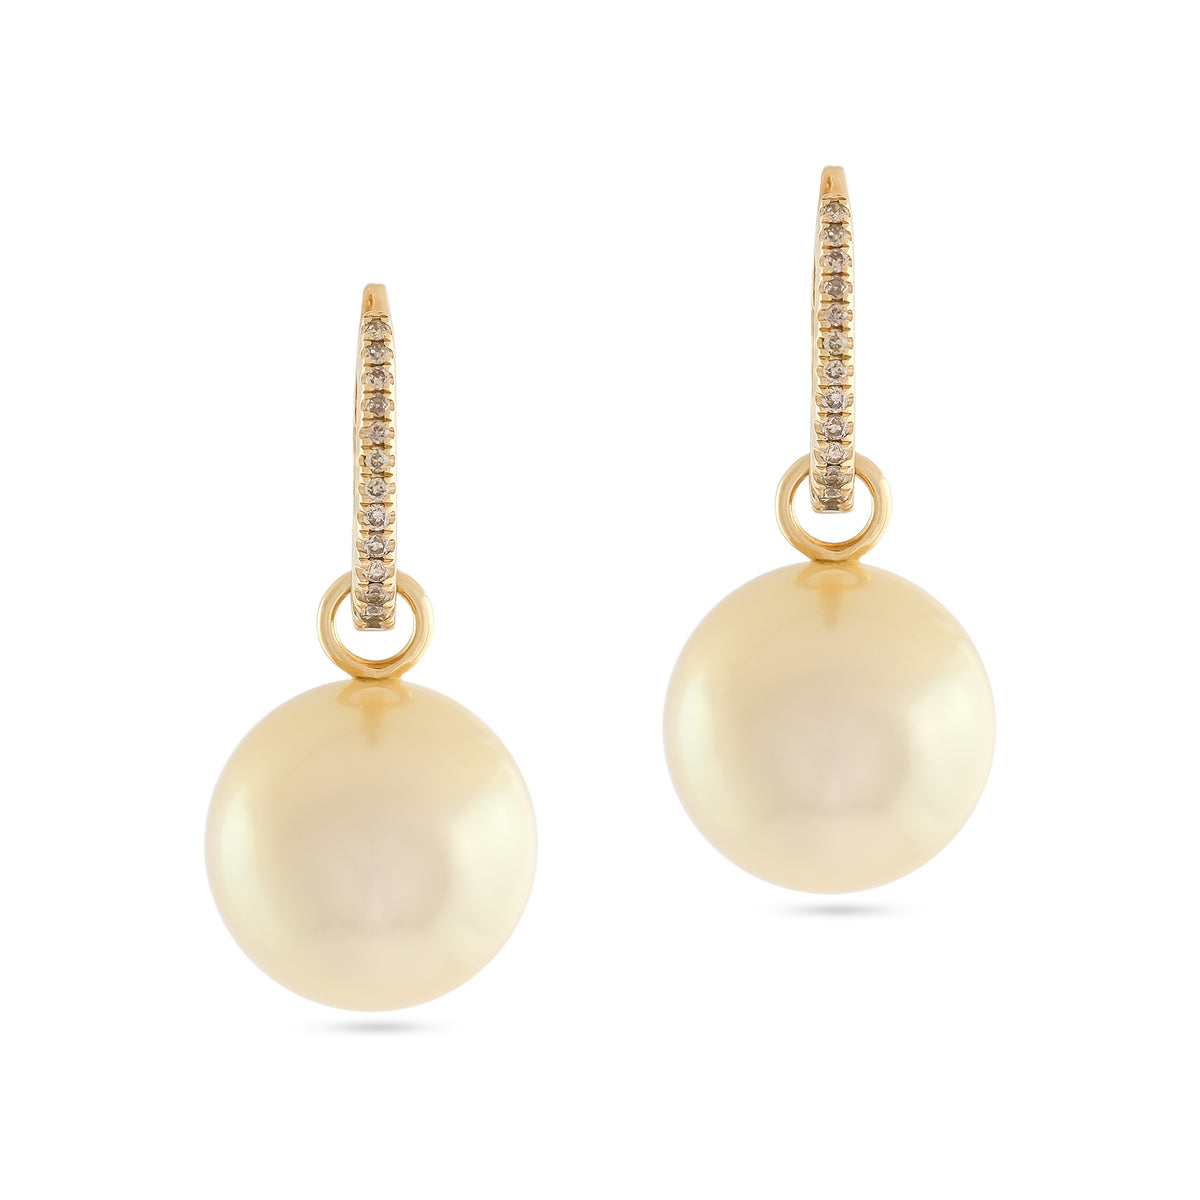 18ct Yellow Gold Diamond and Pearl Earrings